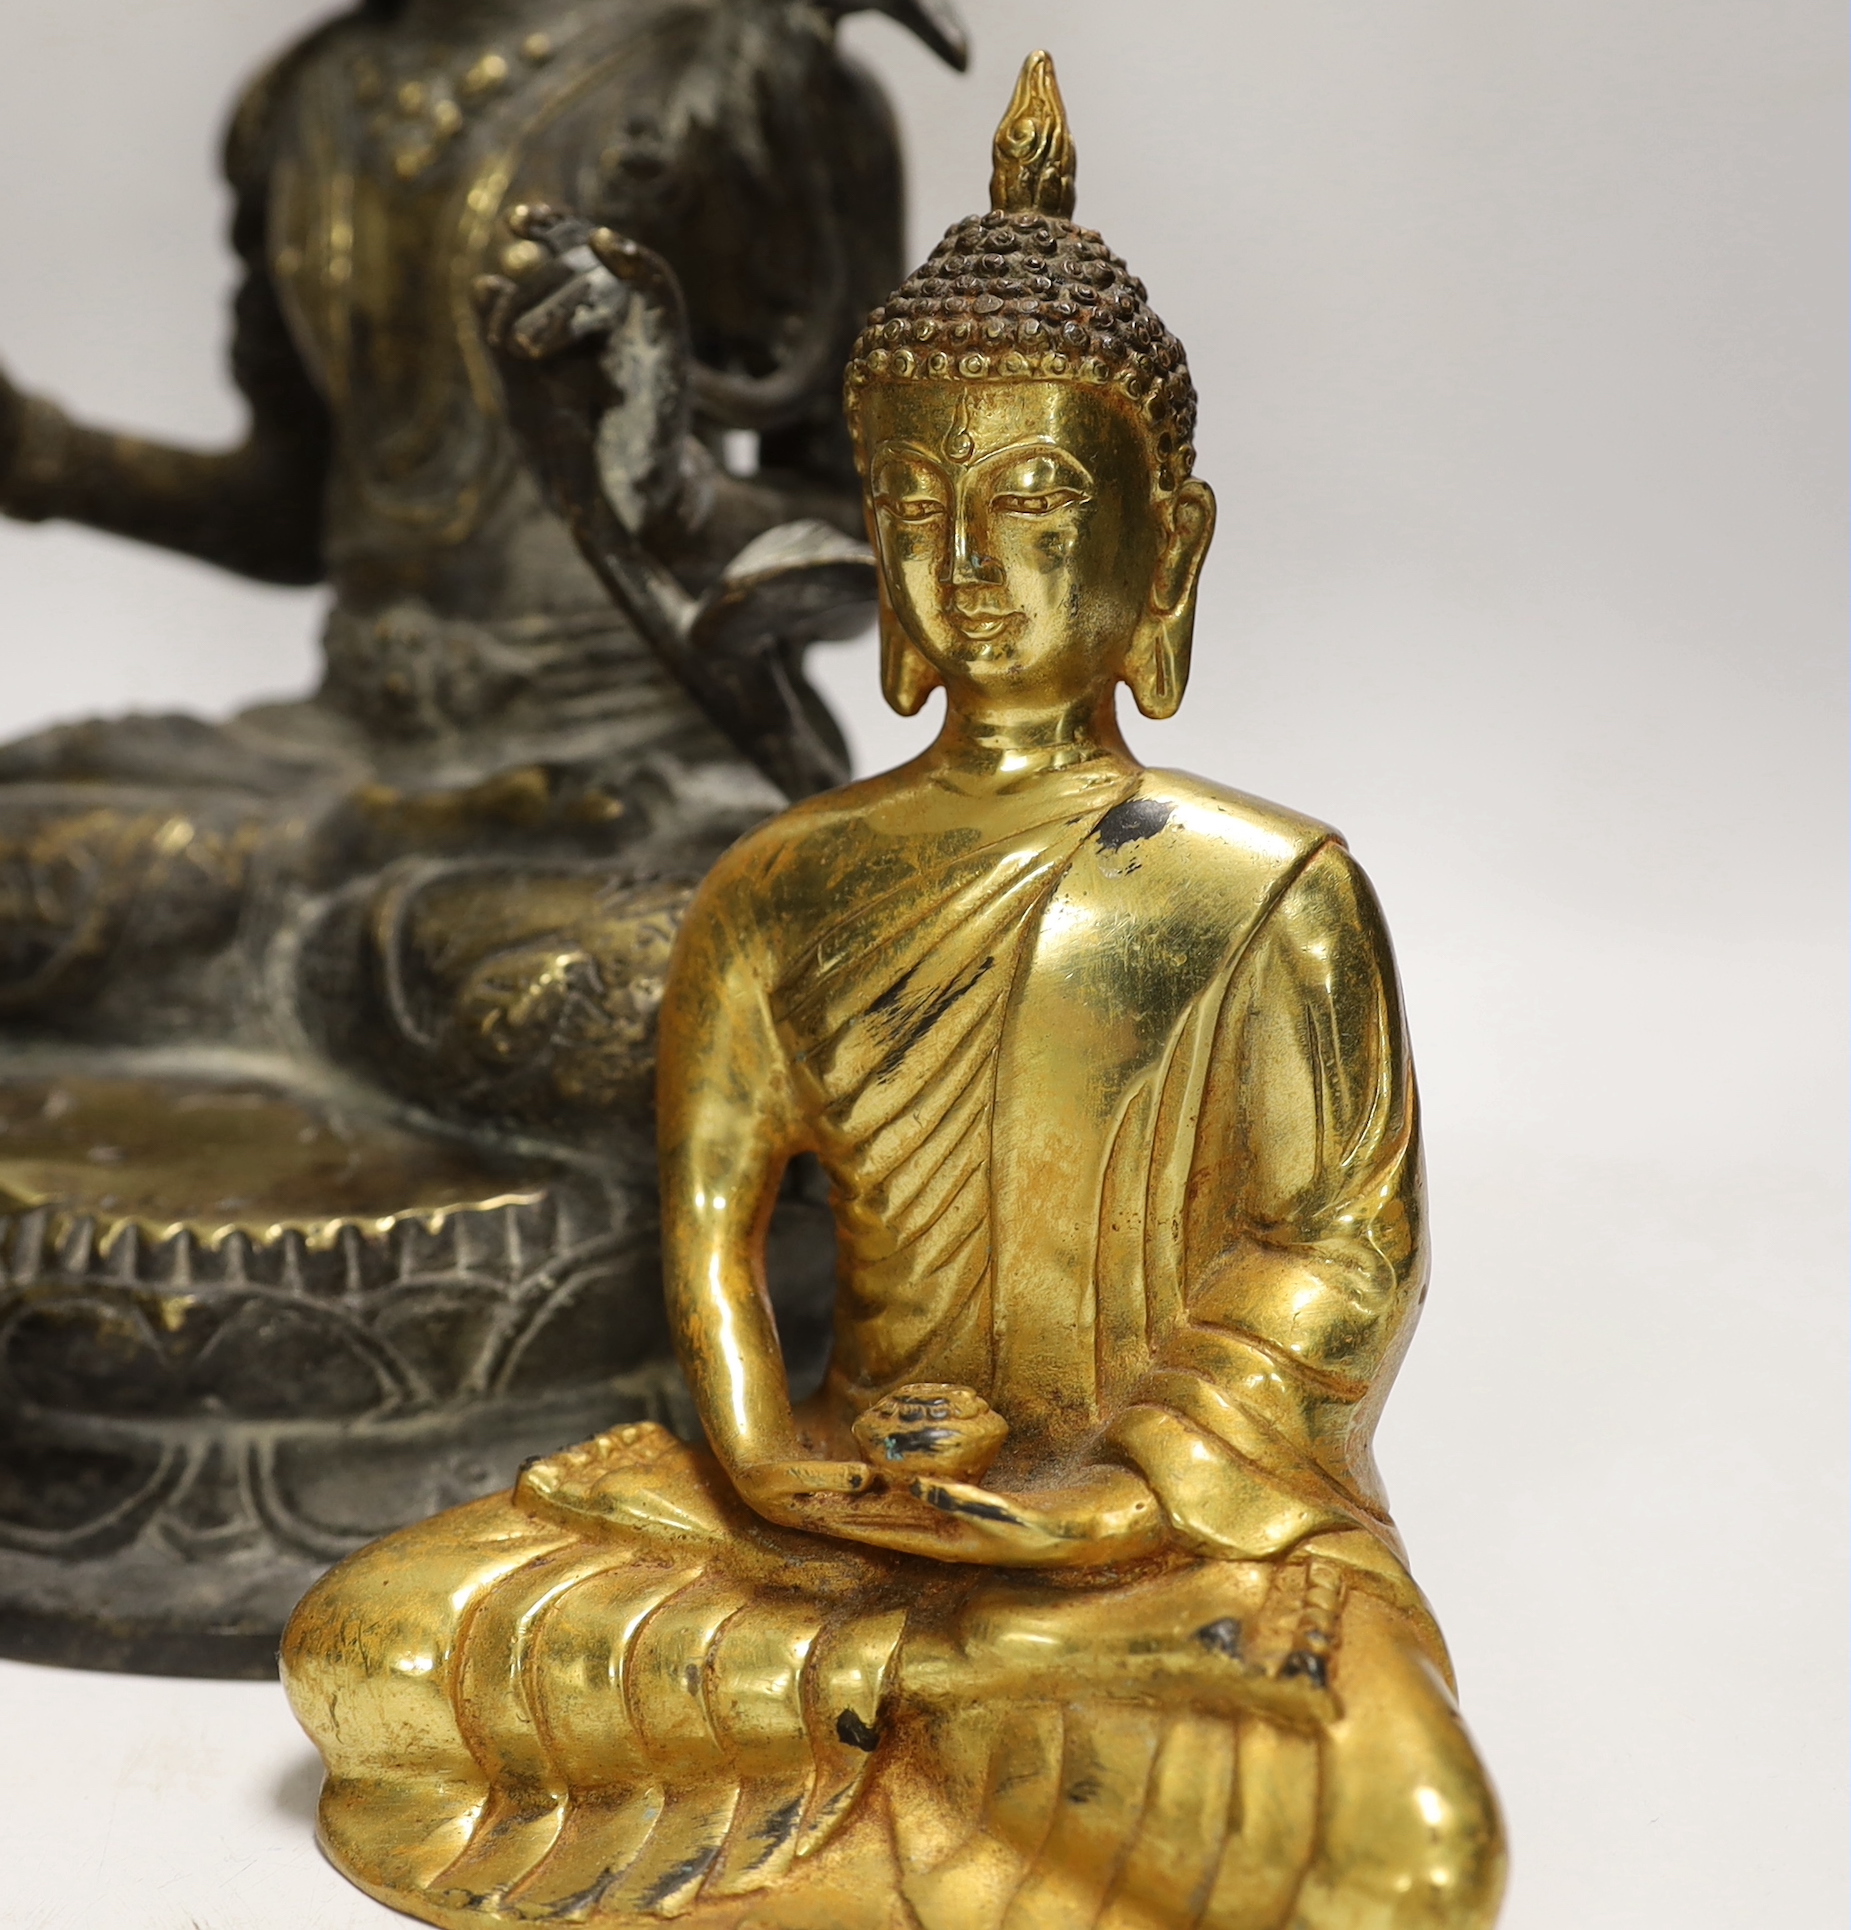 Four Thai and far-eastern bronze figures of the Buddha, tallest 28cm